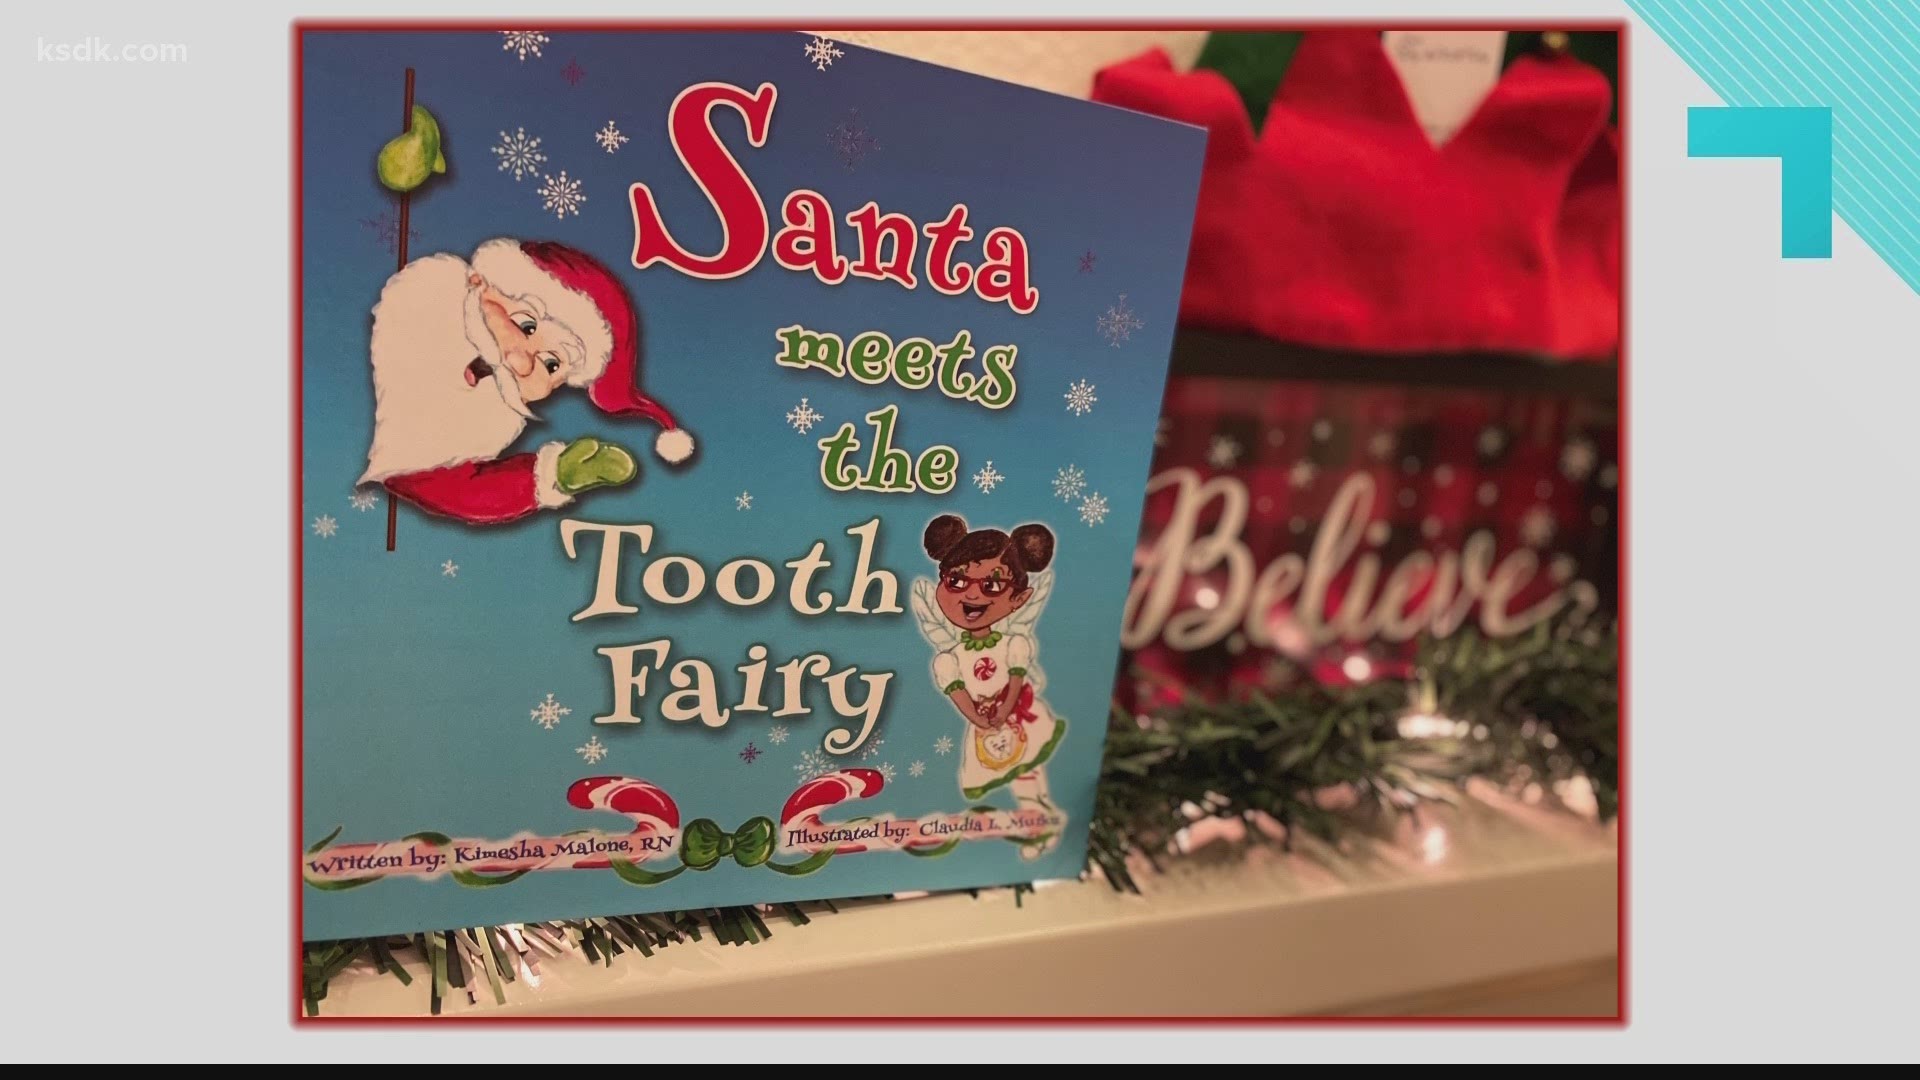 "Santa Meets the Tooth Fairy" is based on something that happened to her son.